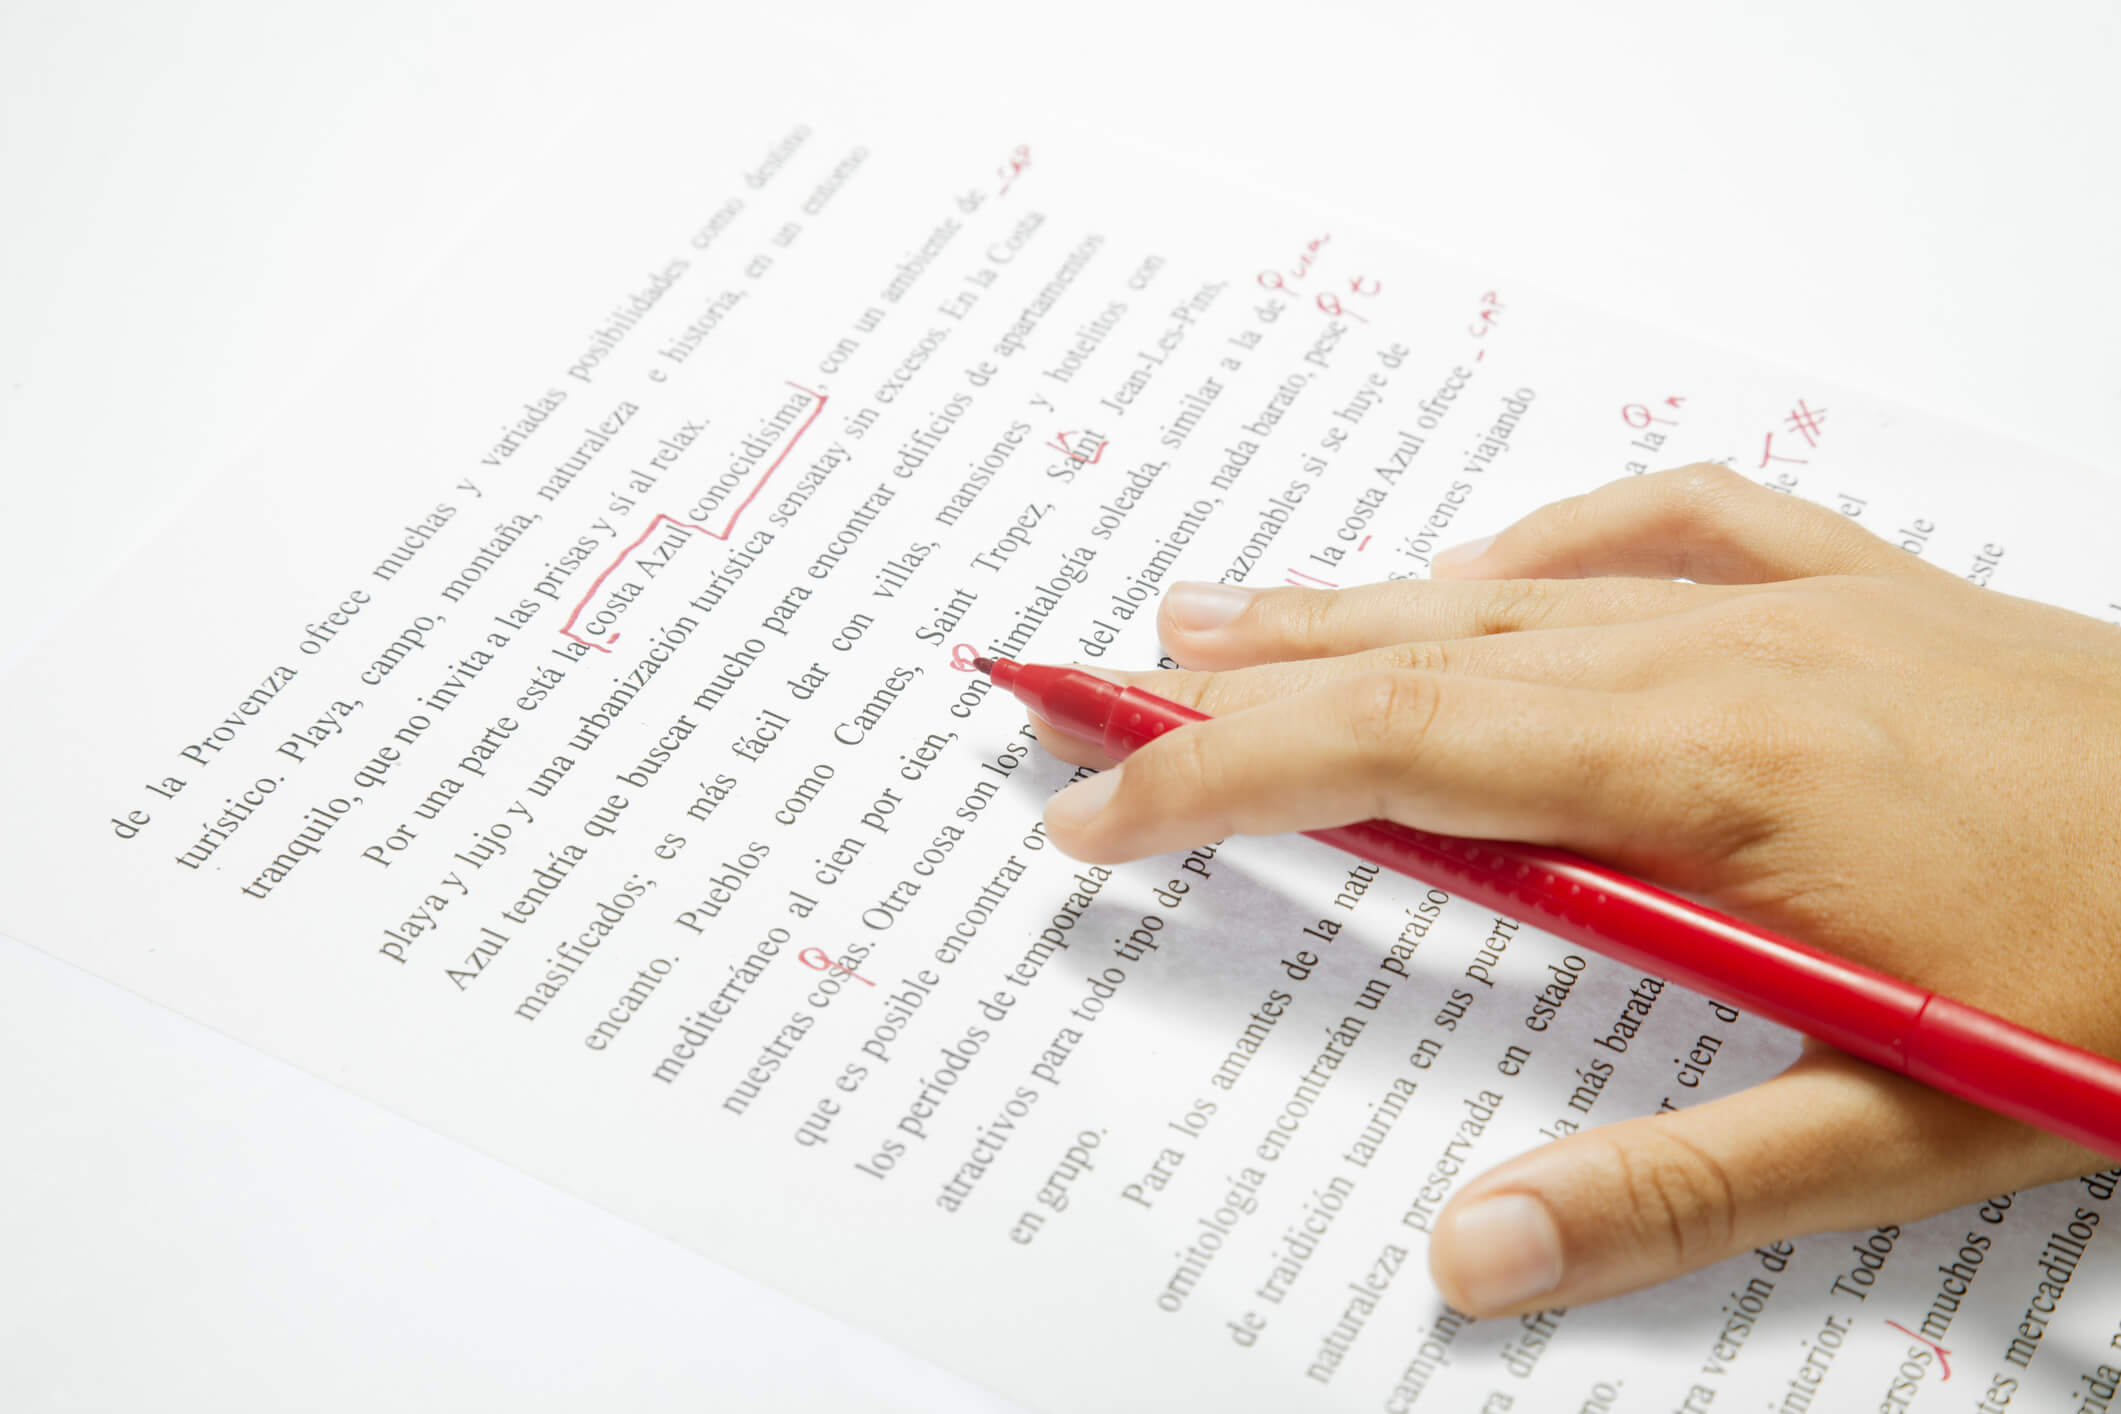 5 Last-Minute Tips for Completing Application Essays - EssayEdge